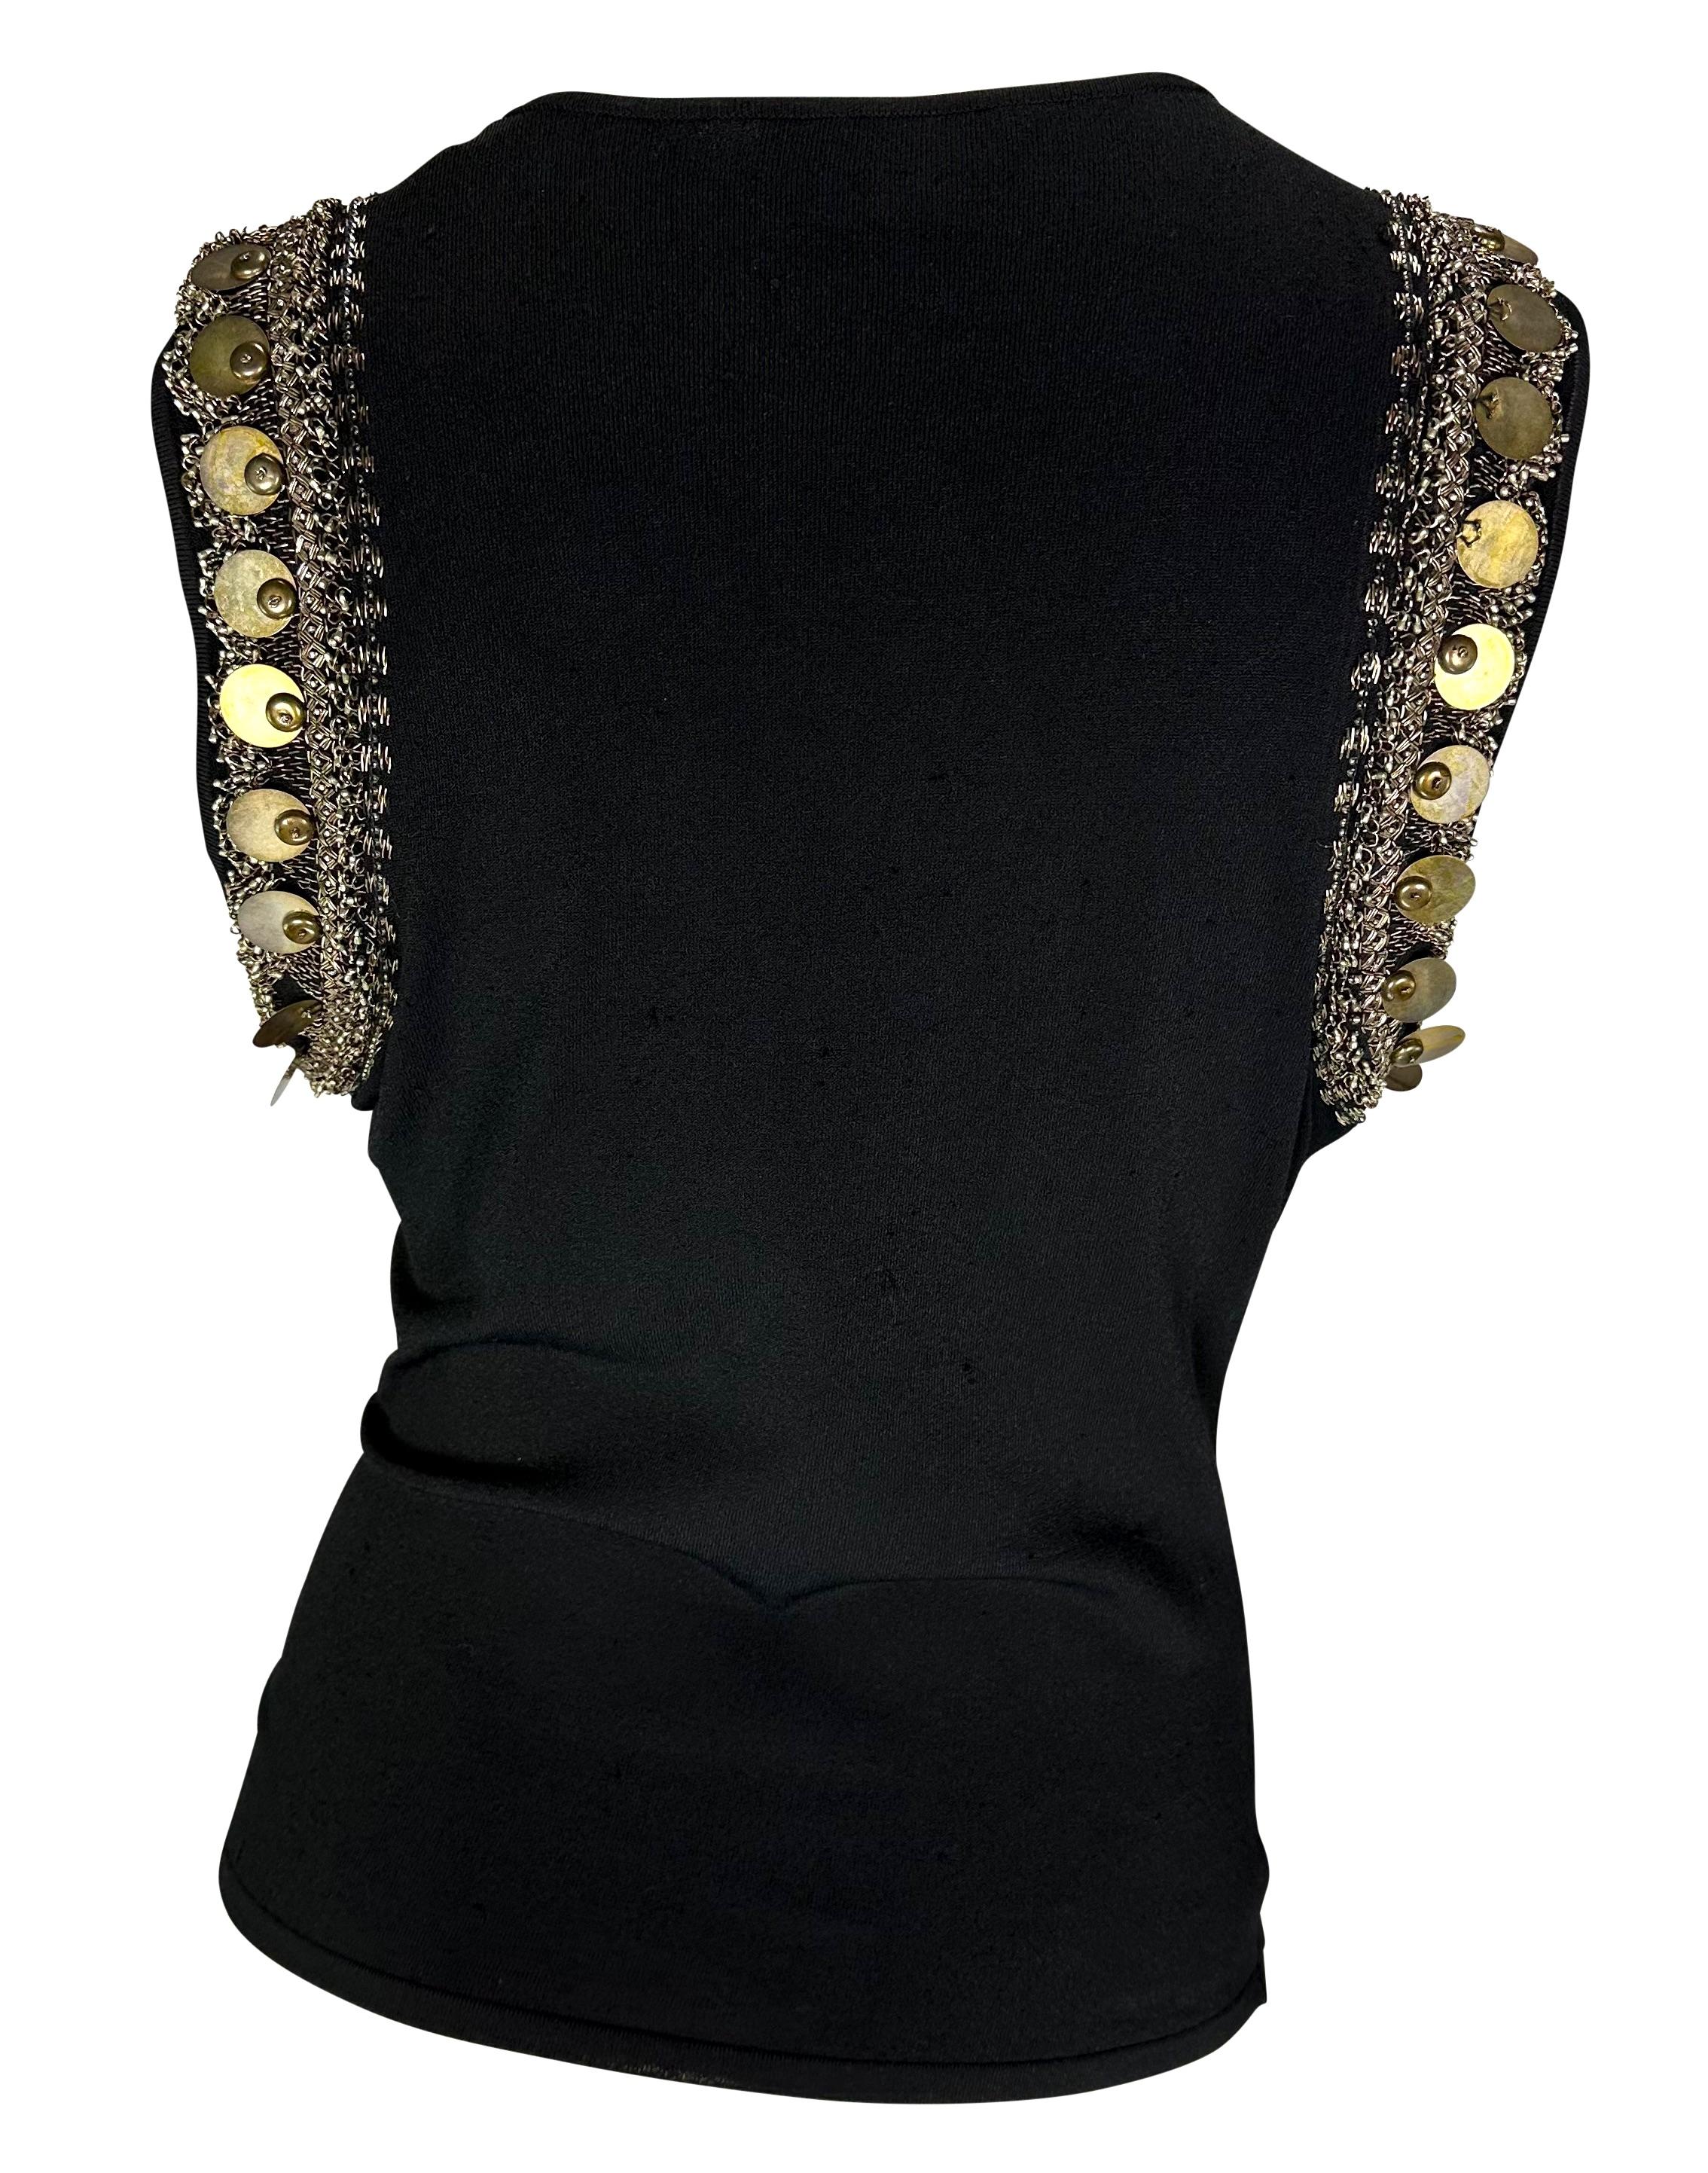 Women's S/S 2004 Versace by Donatella Brass Embroidered Beaded Black Knit Plunging Top For Sale